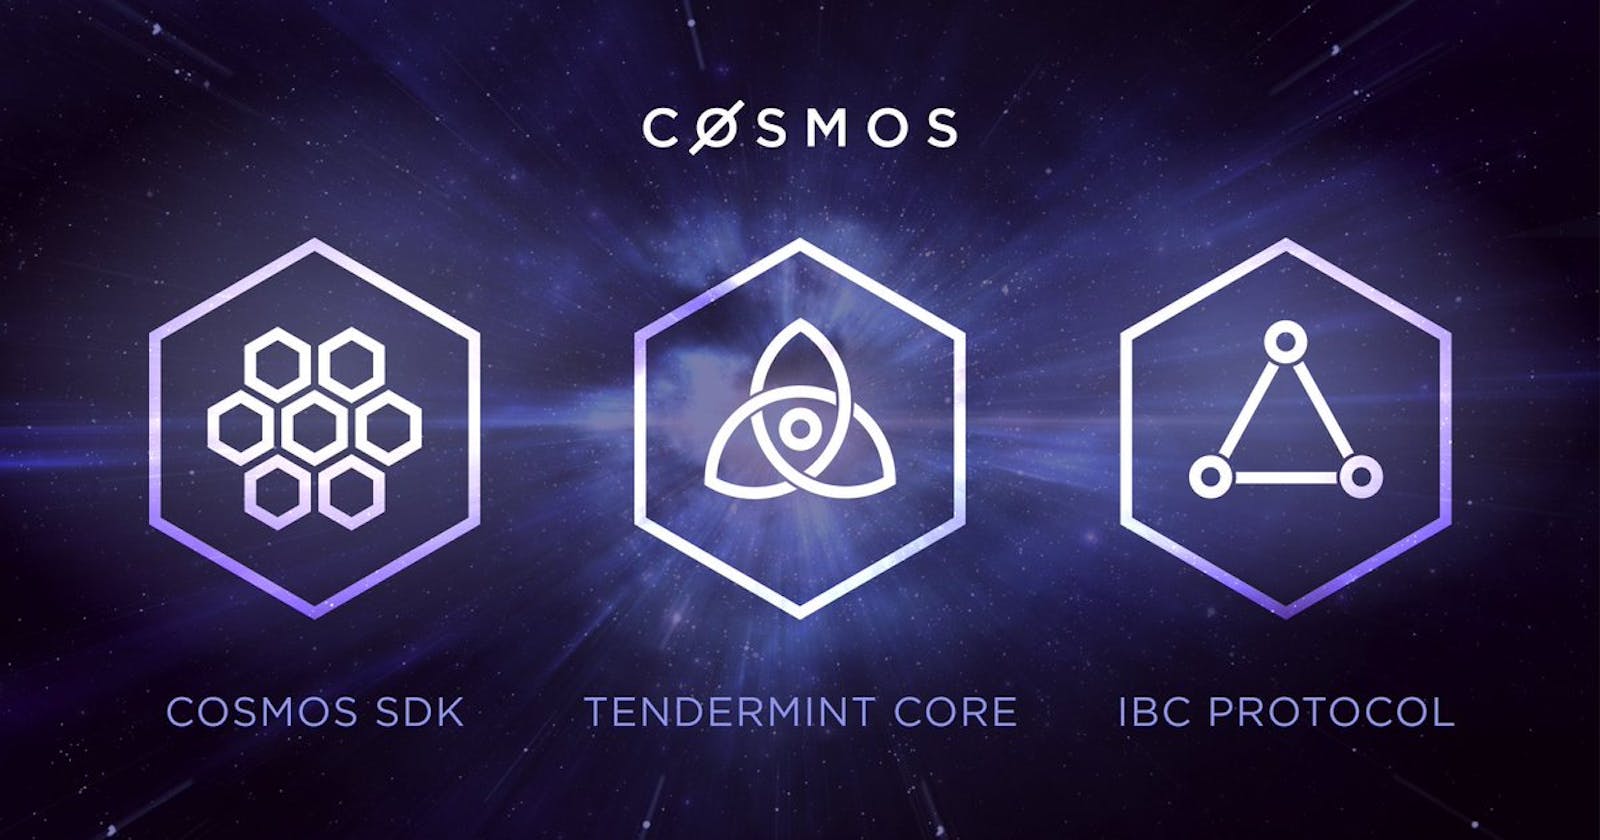 A community curated list of awesome projects related to the Cosmos SDK ecosystem